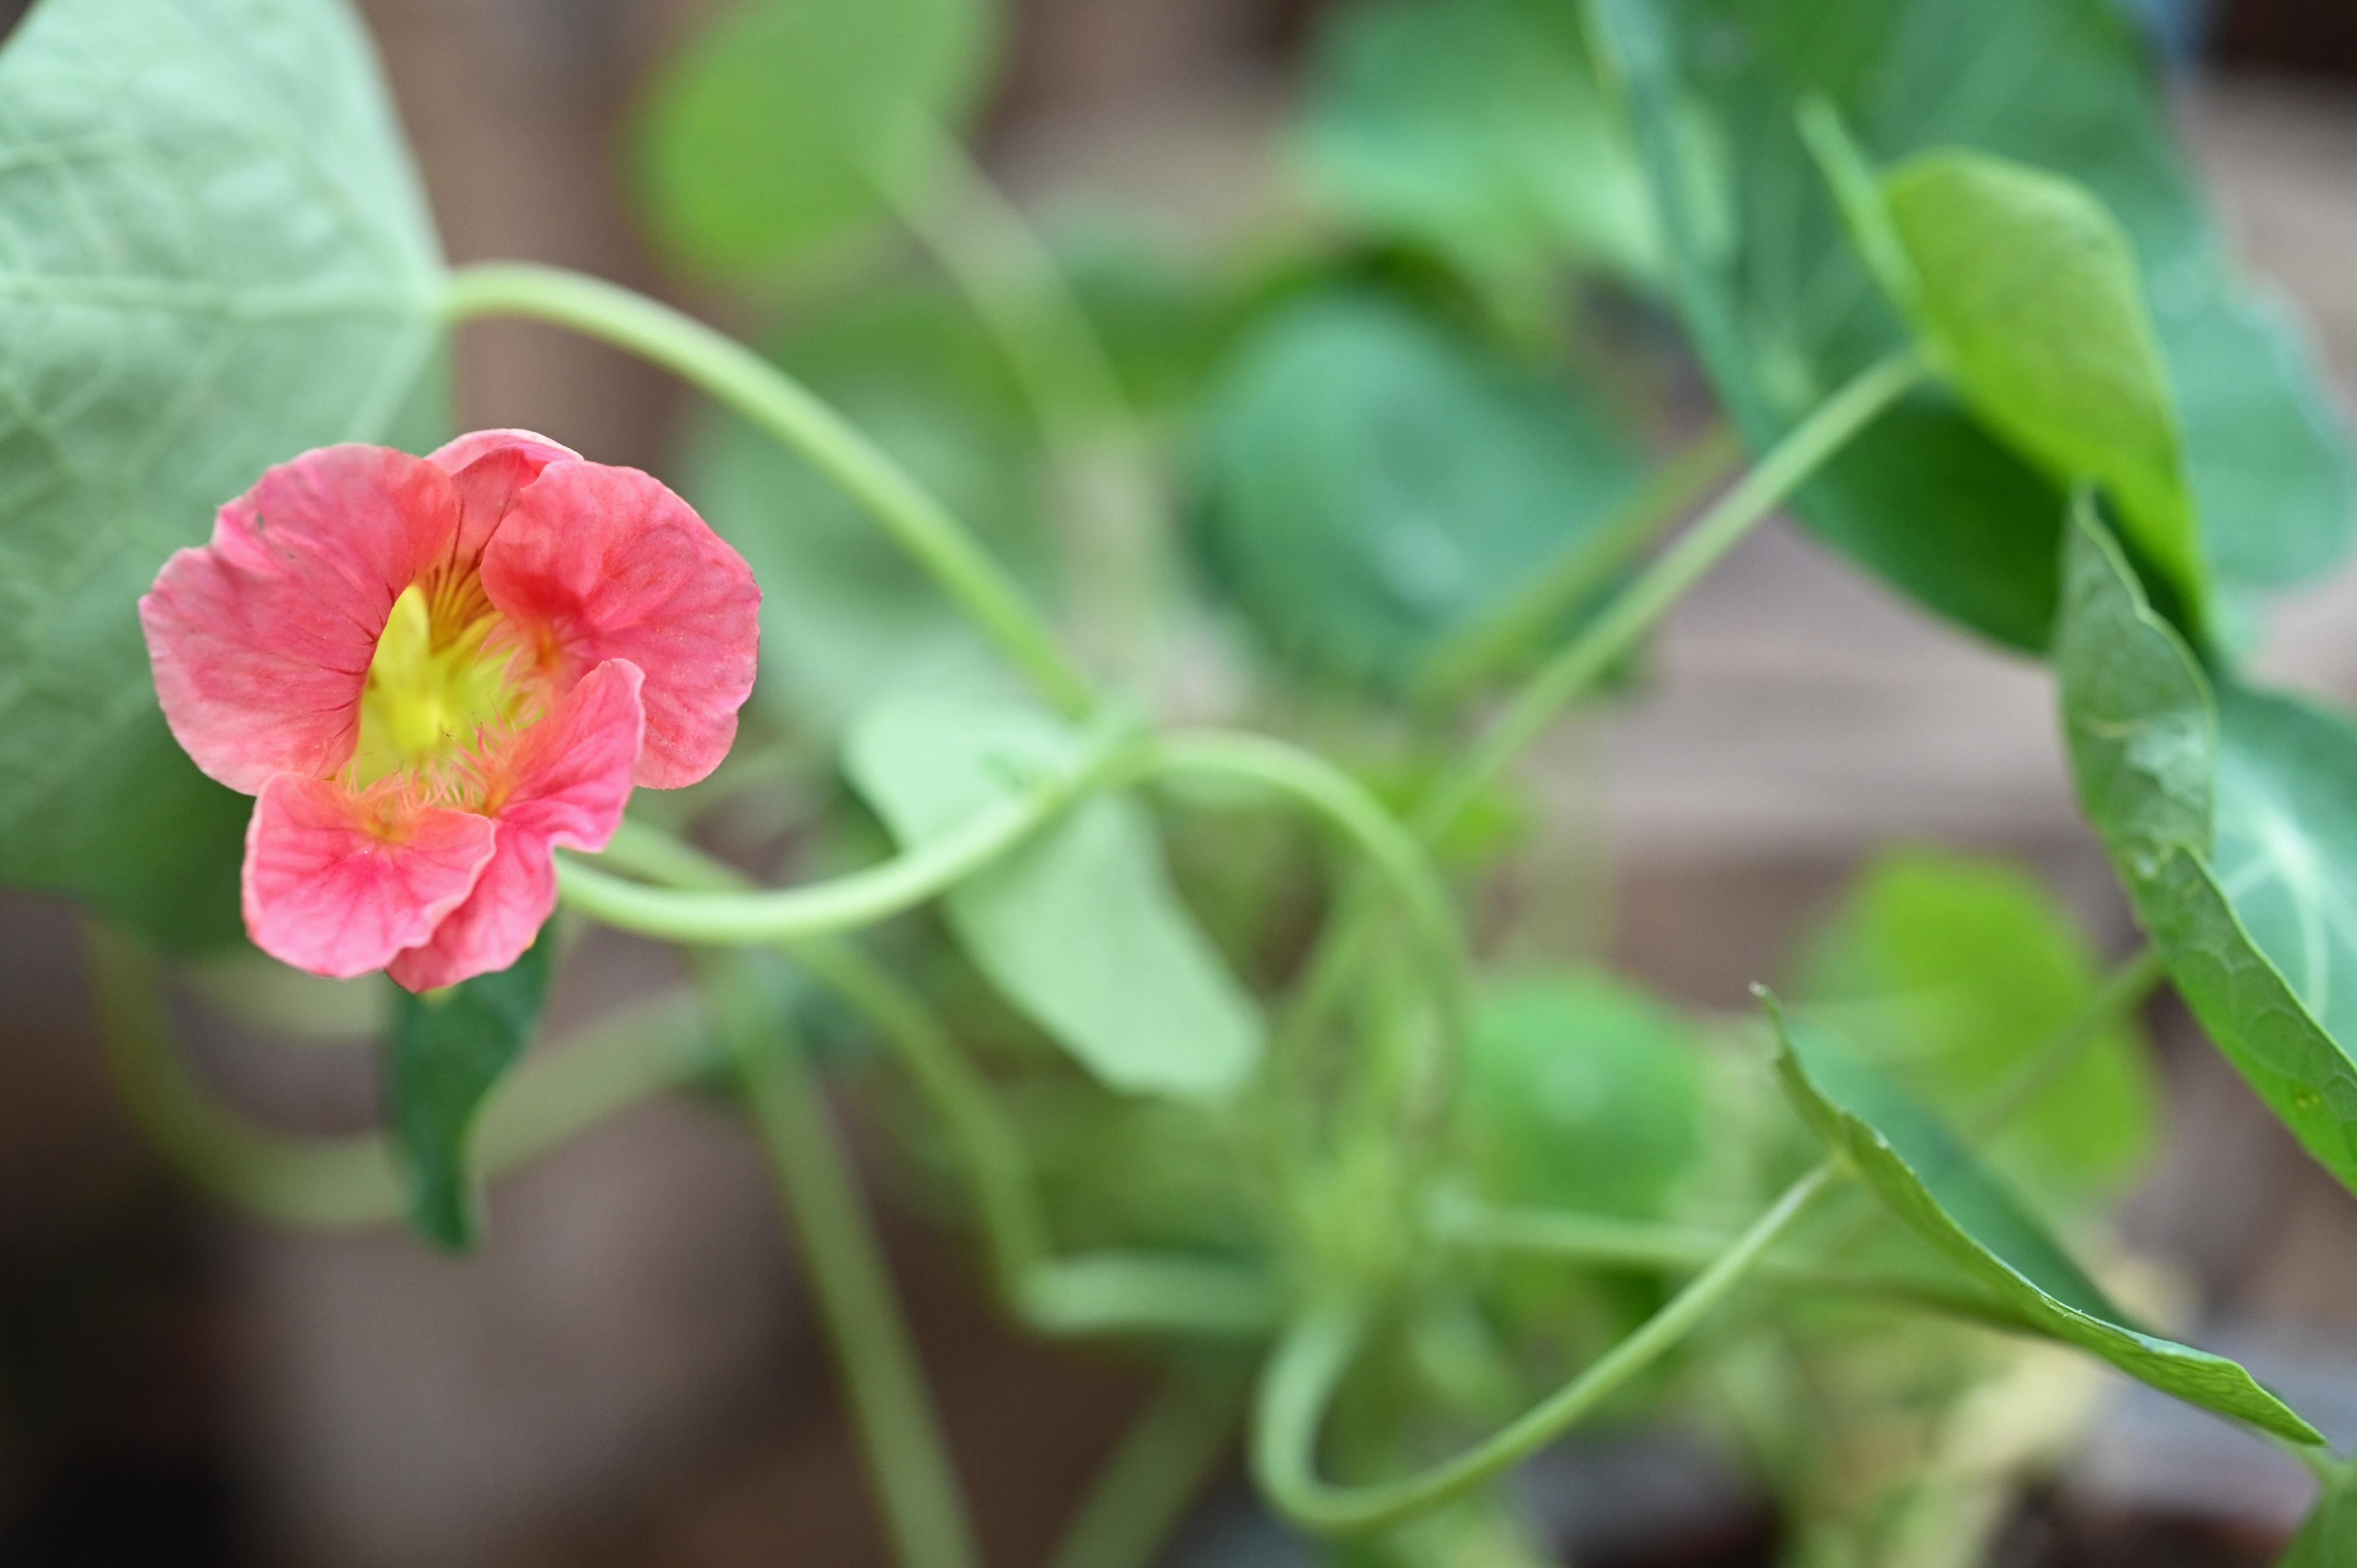 Starting from April 22, a rich variety of about 500 edible flowers and herbs for springtime will be displayed at an exhibition to be held at the Forsgate Conservatory in Hong Kong Park managed by the Leisure and Cultural Services Department. Photo shows a Nasturtium in the exhibition.